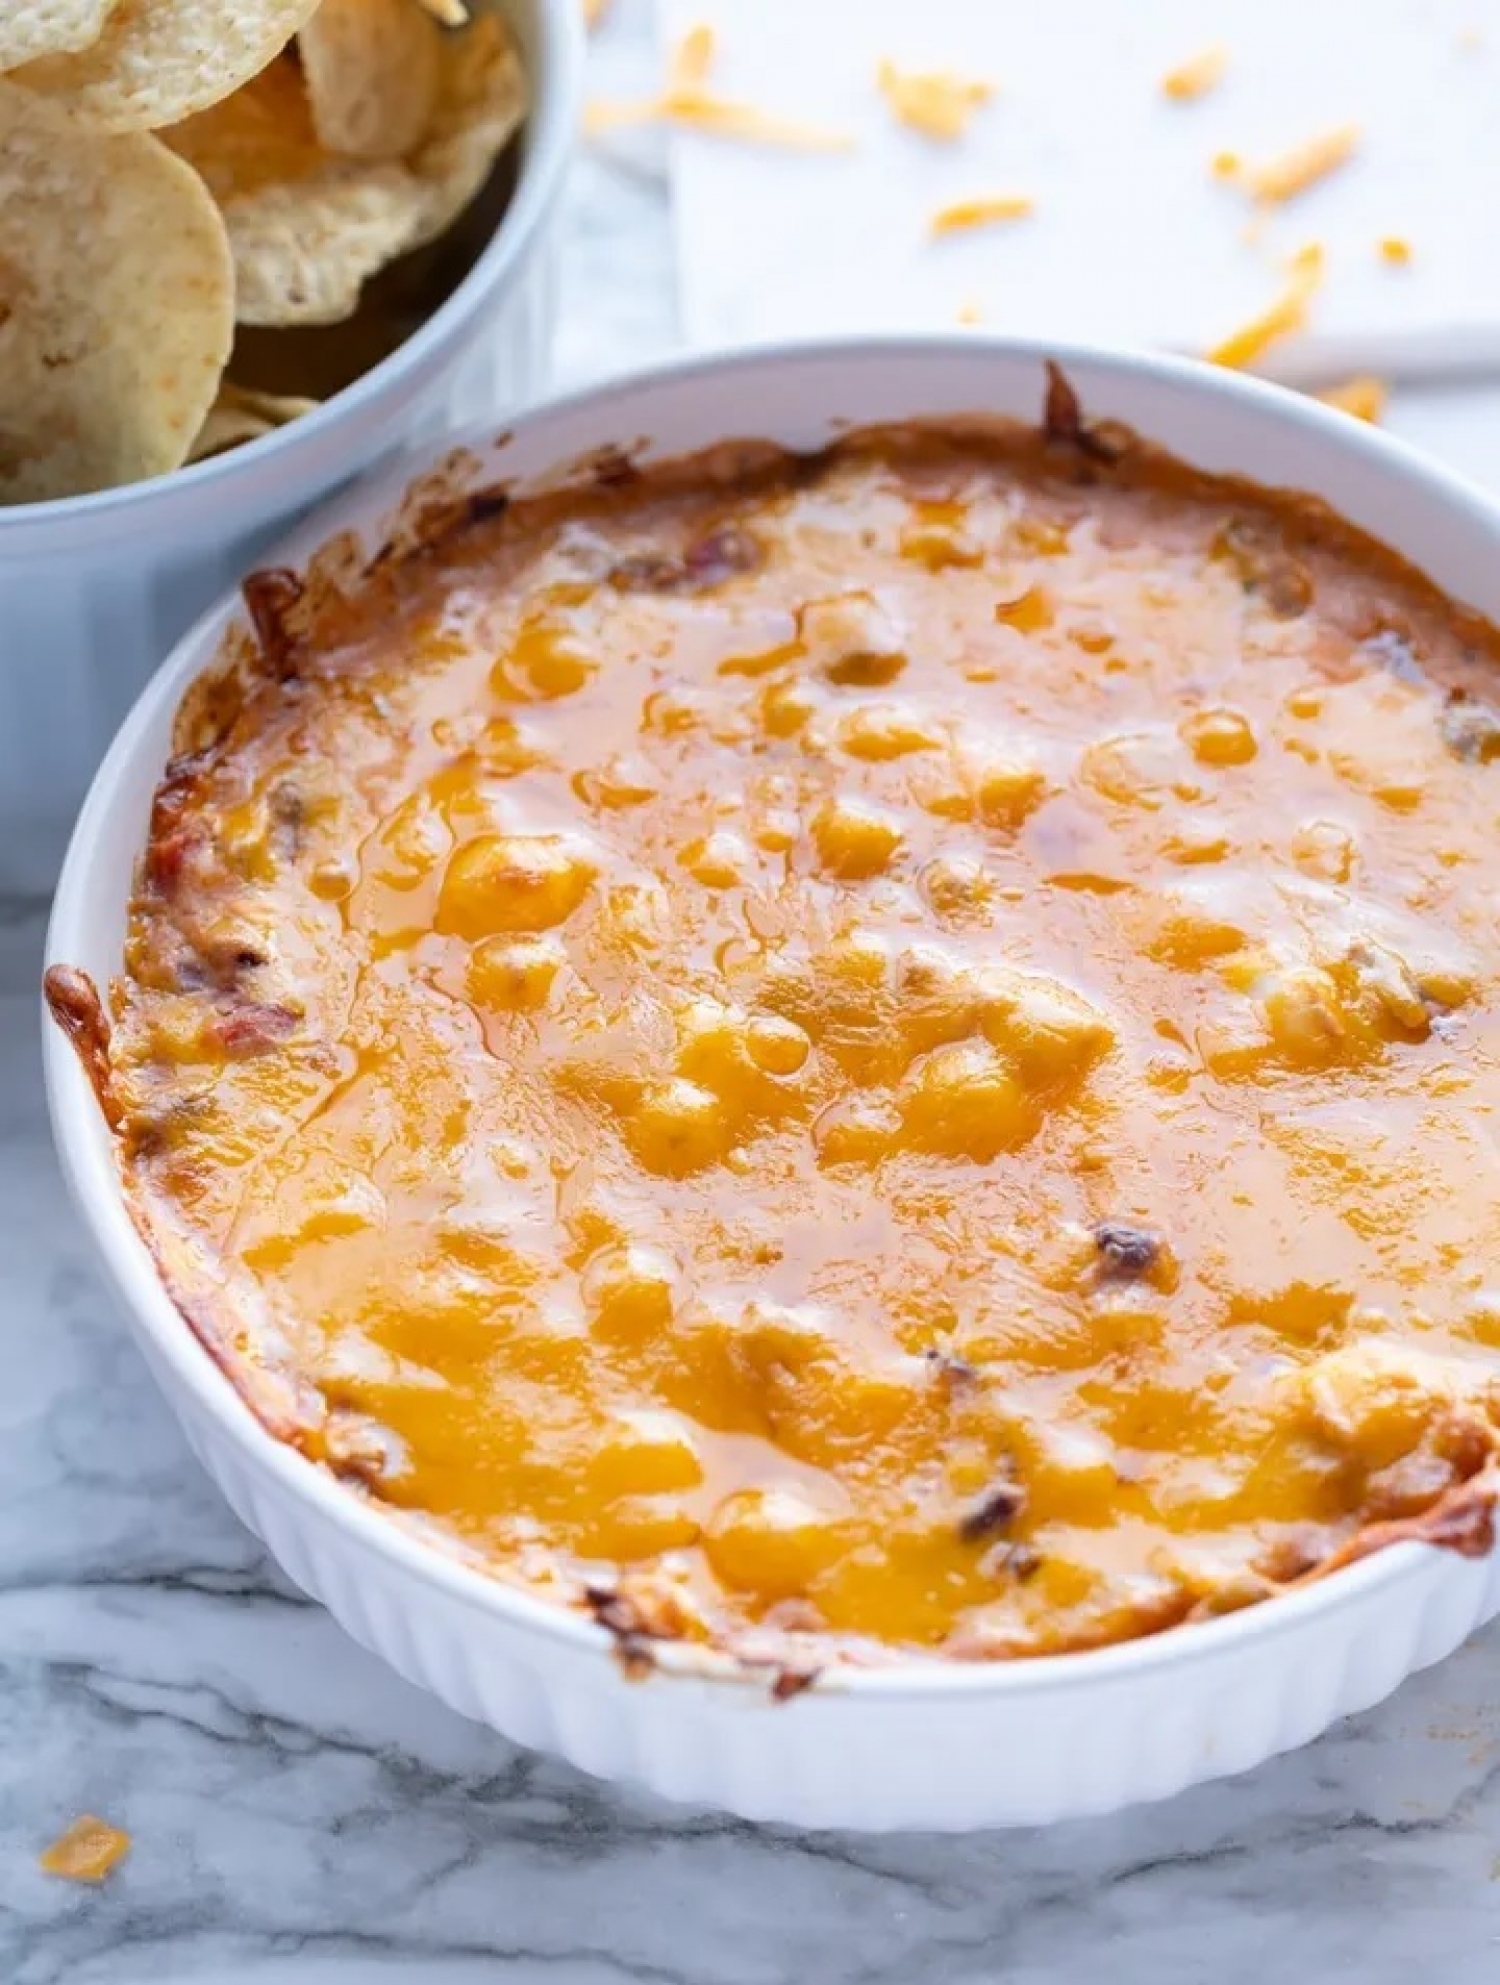 <p>This mouthwatering black-eyed pea dip is blissfully cheesy, tangy and kicked up a notch with green chilies. Use your favorite store-bought BBQ sauce or make your own, for the ultimate dip you can enjoy as an appetizer or for dinner (no judgment). <a href="https://www.myforkinglife.com/bbq-black-eyed-pea-dip/" rel="noopener">Get the recipe here.</a></p>